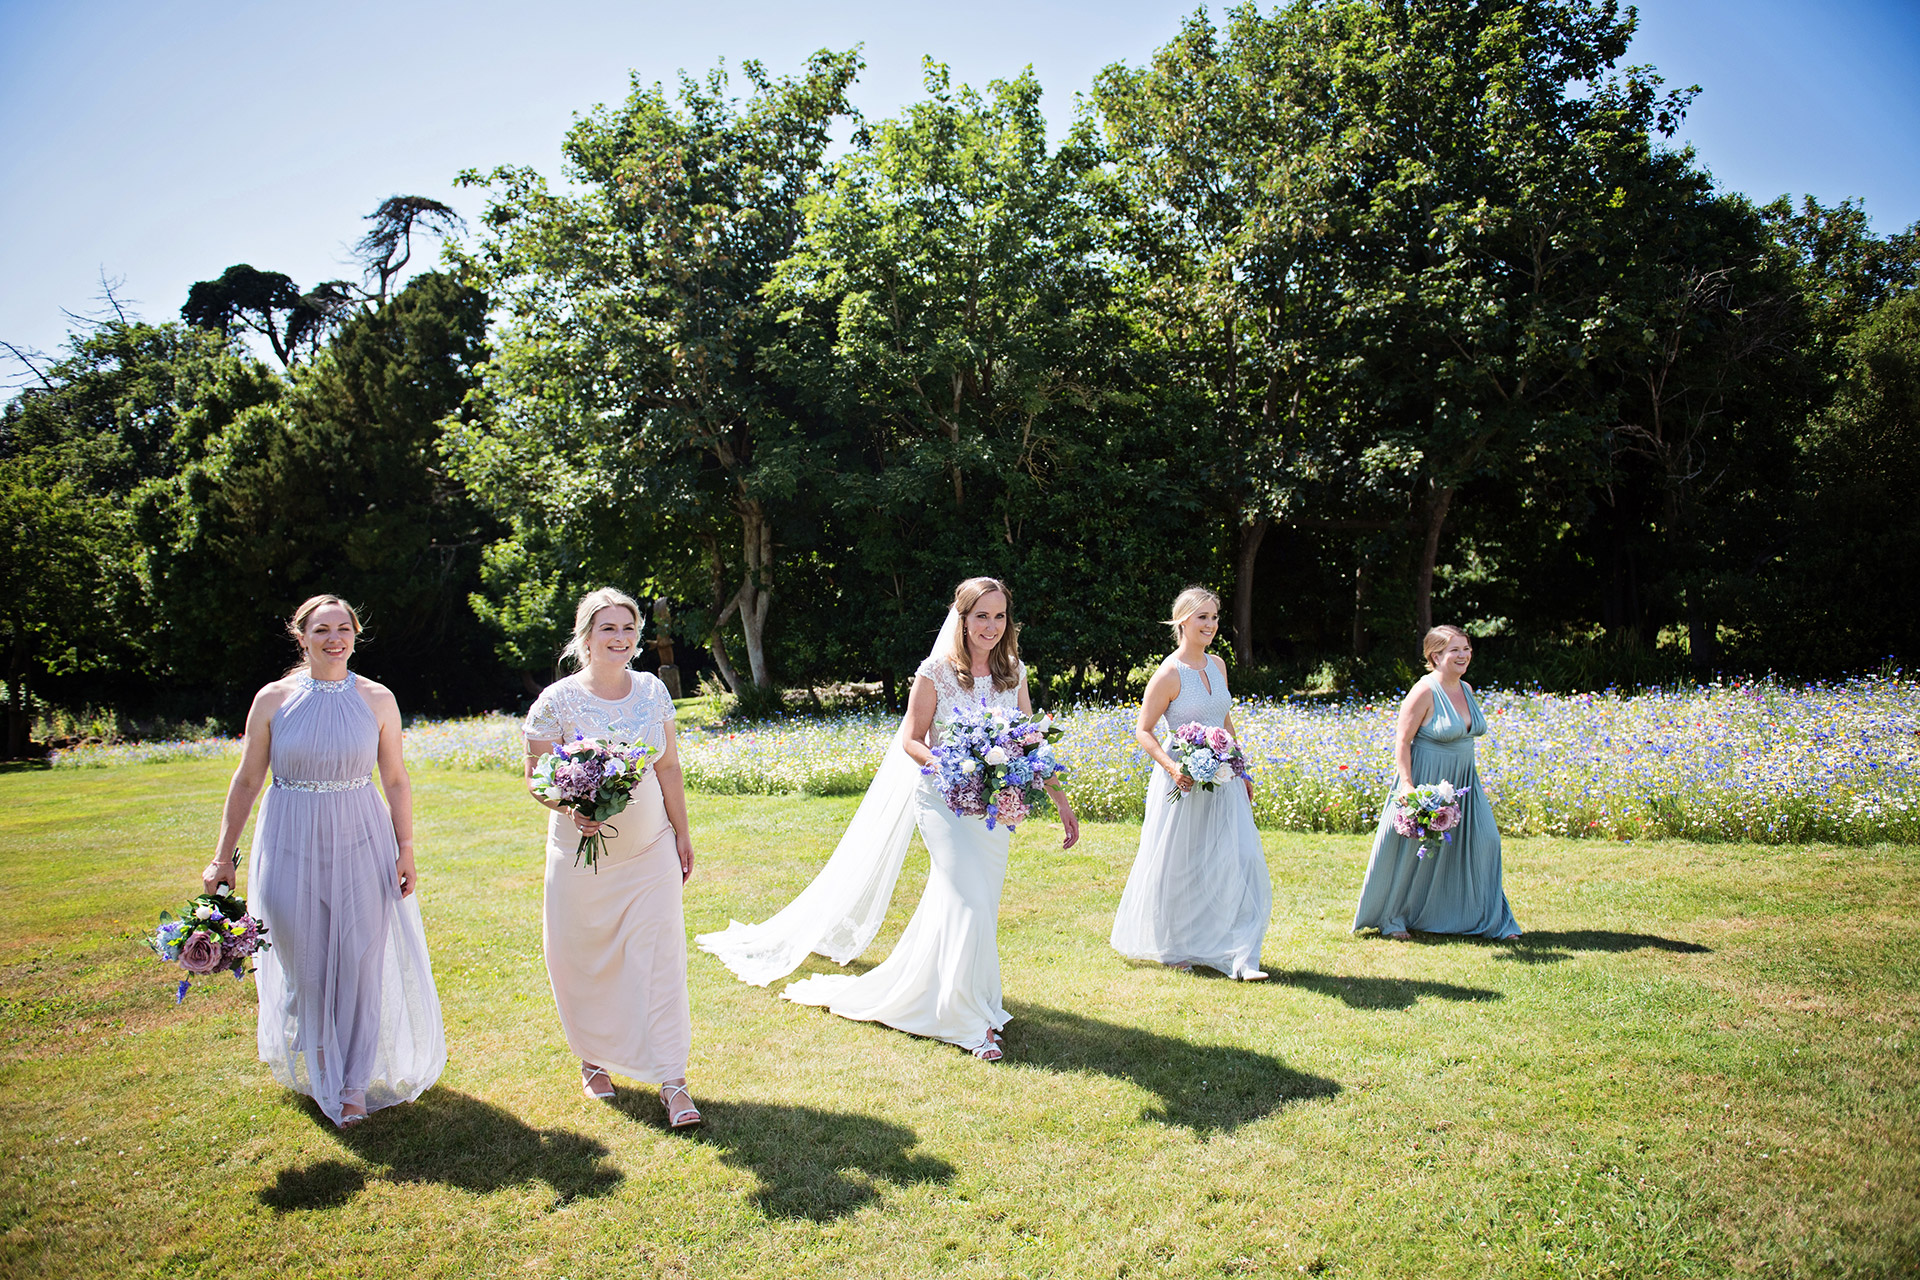 Bride with her bridesmaids walking together with a wildflower meadow behind them. Taken at Cleevdon Hall